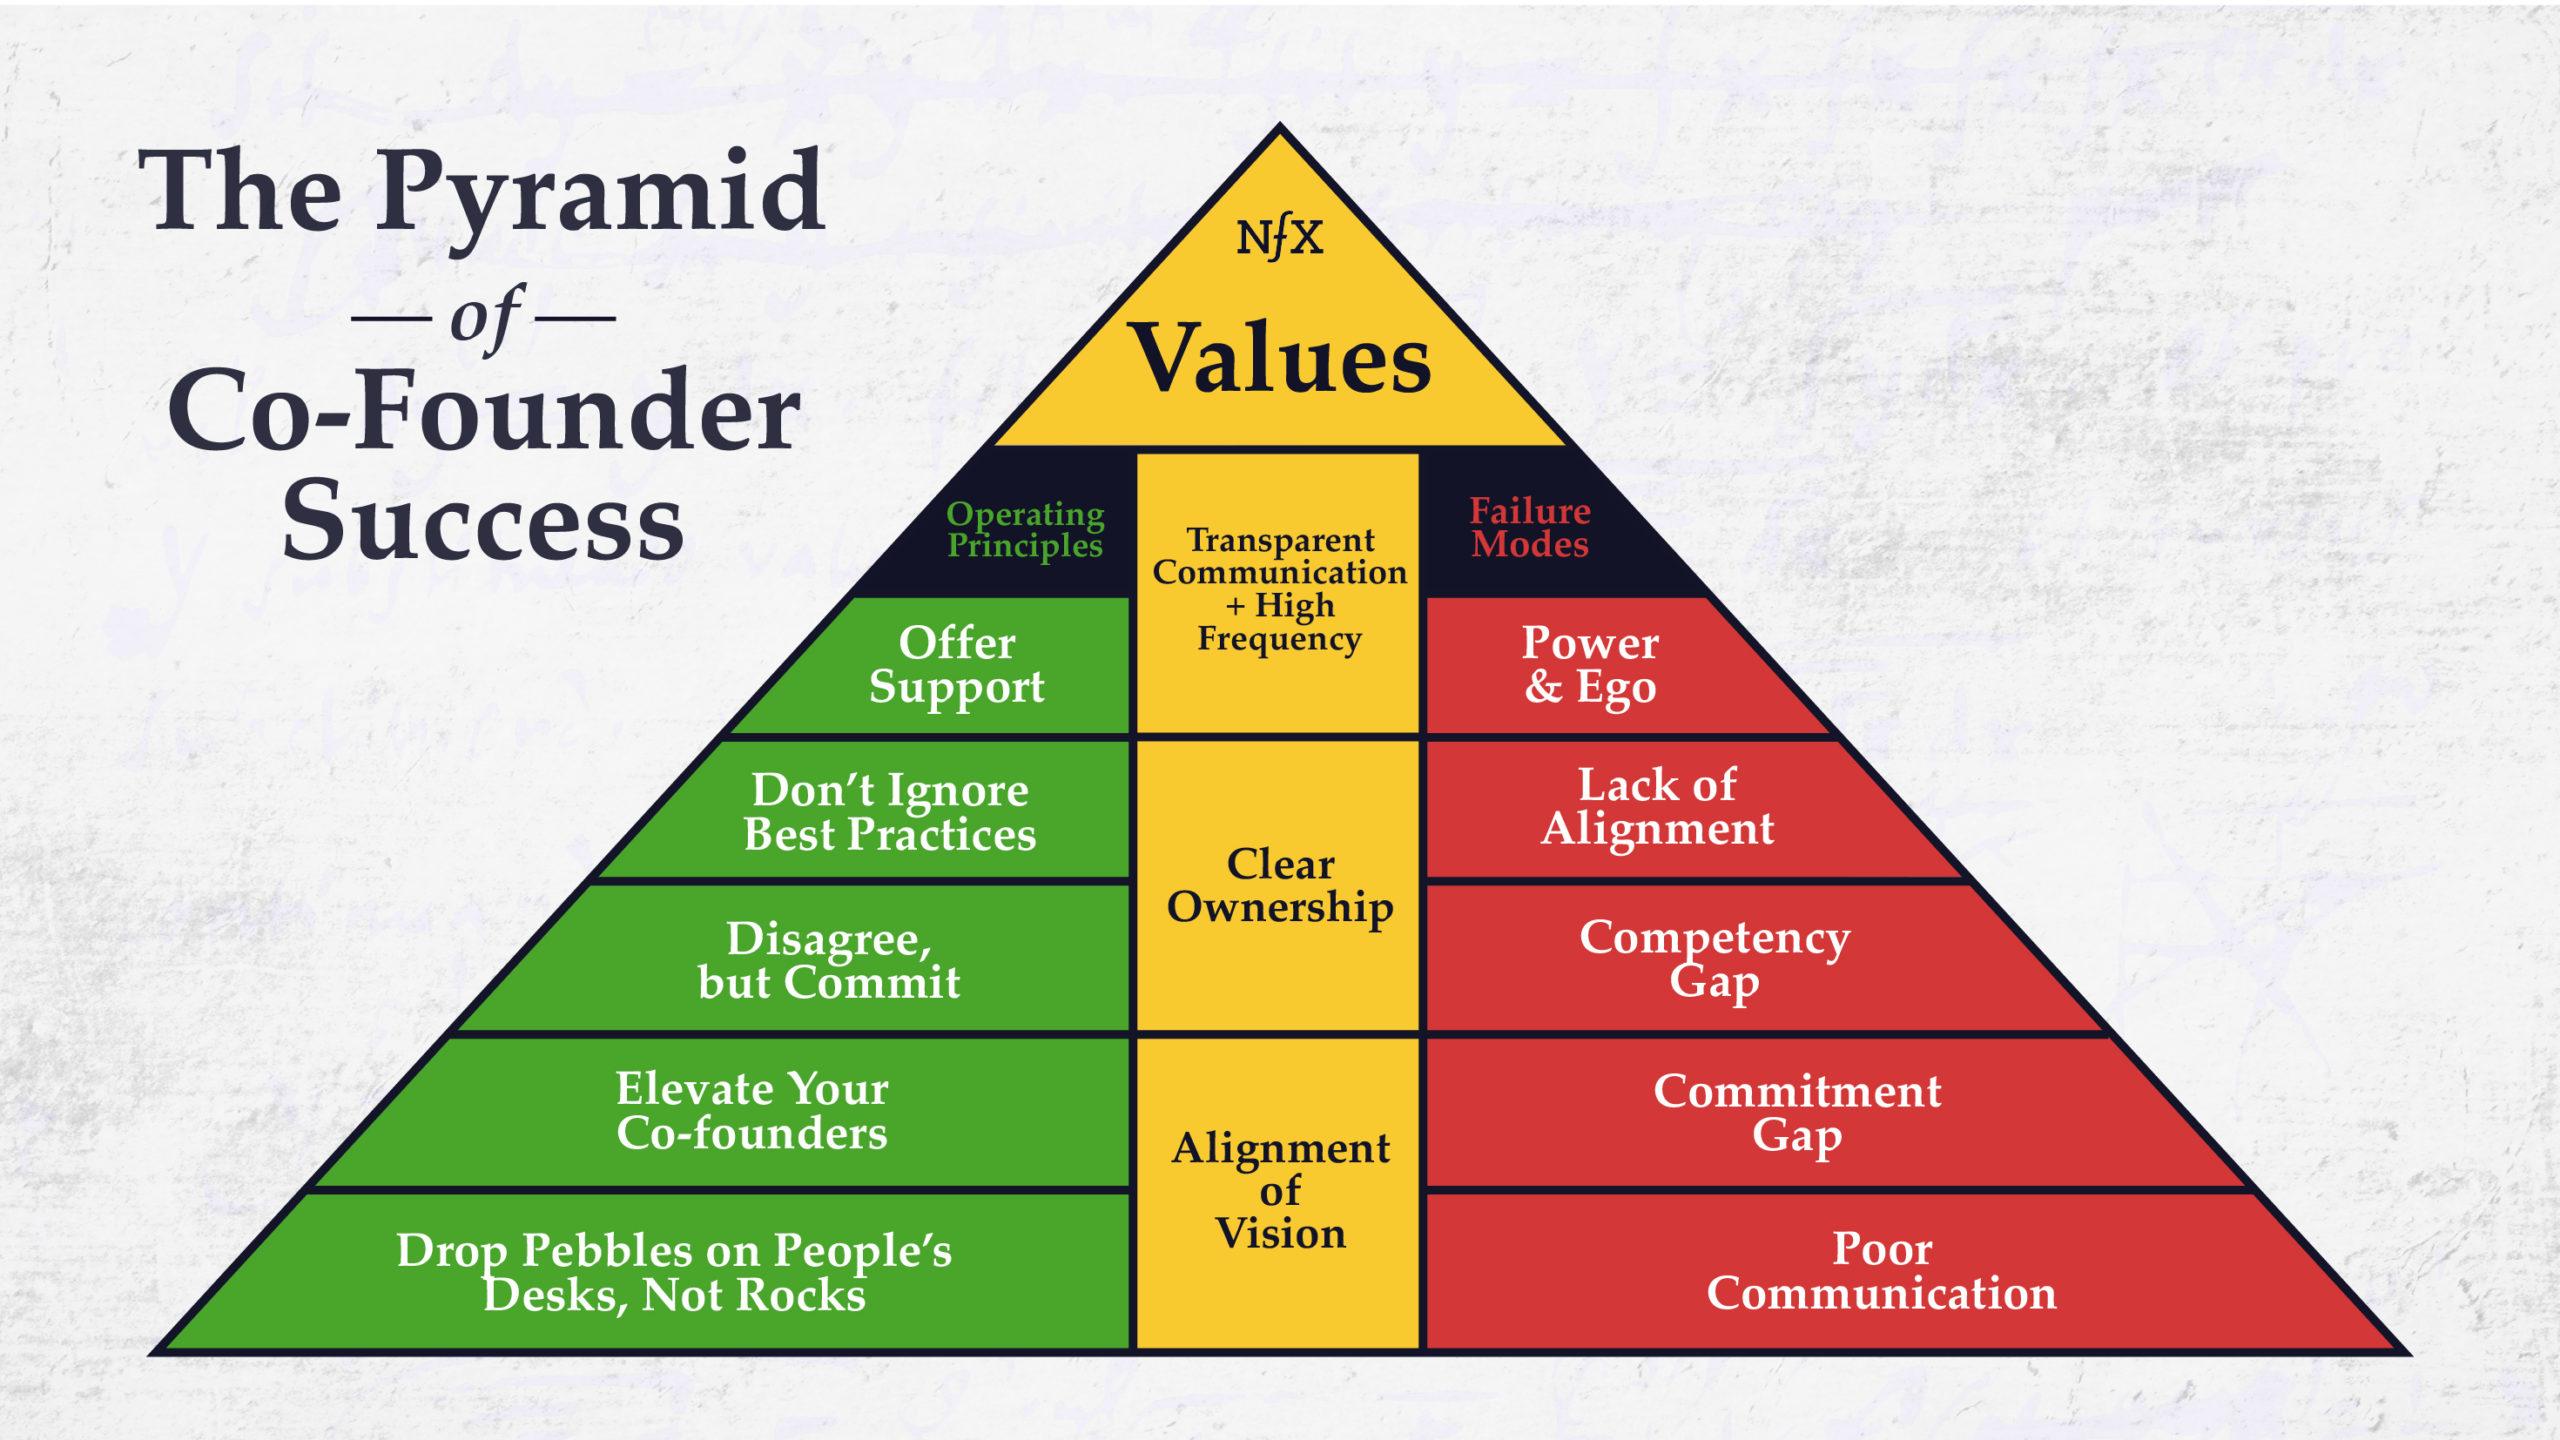 The Pyramid of Co-Founder Success